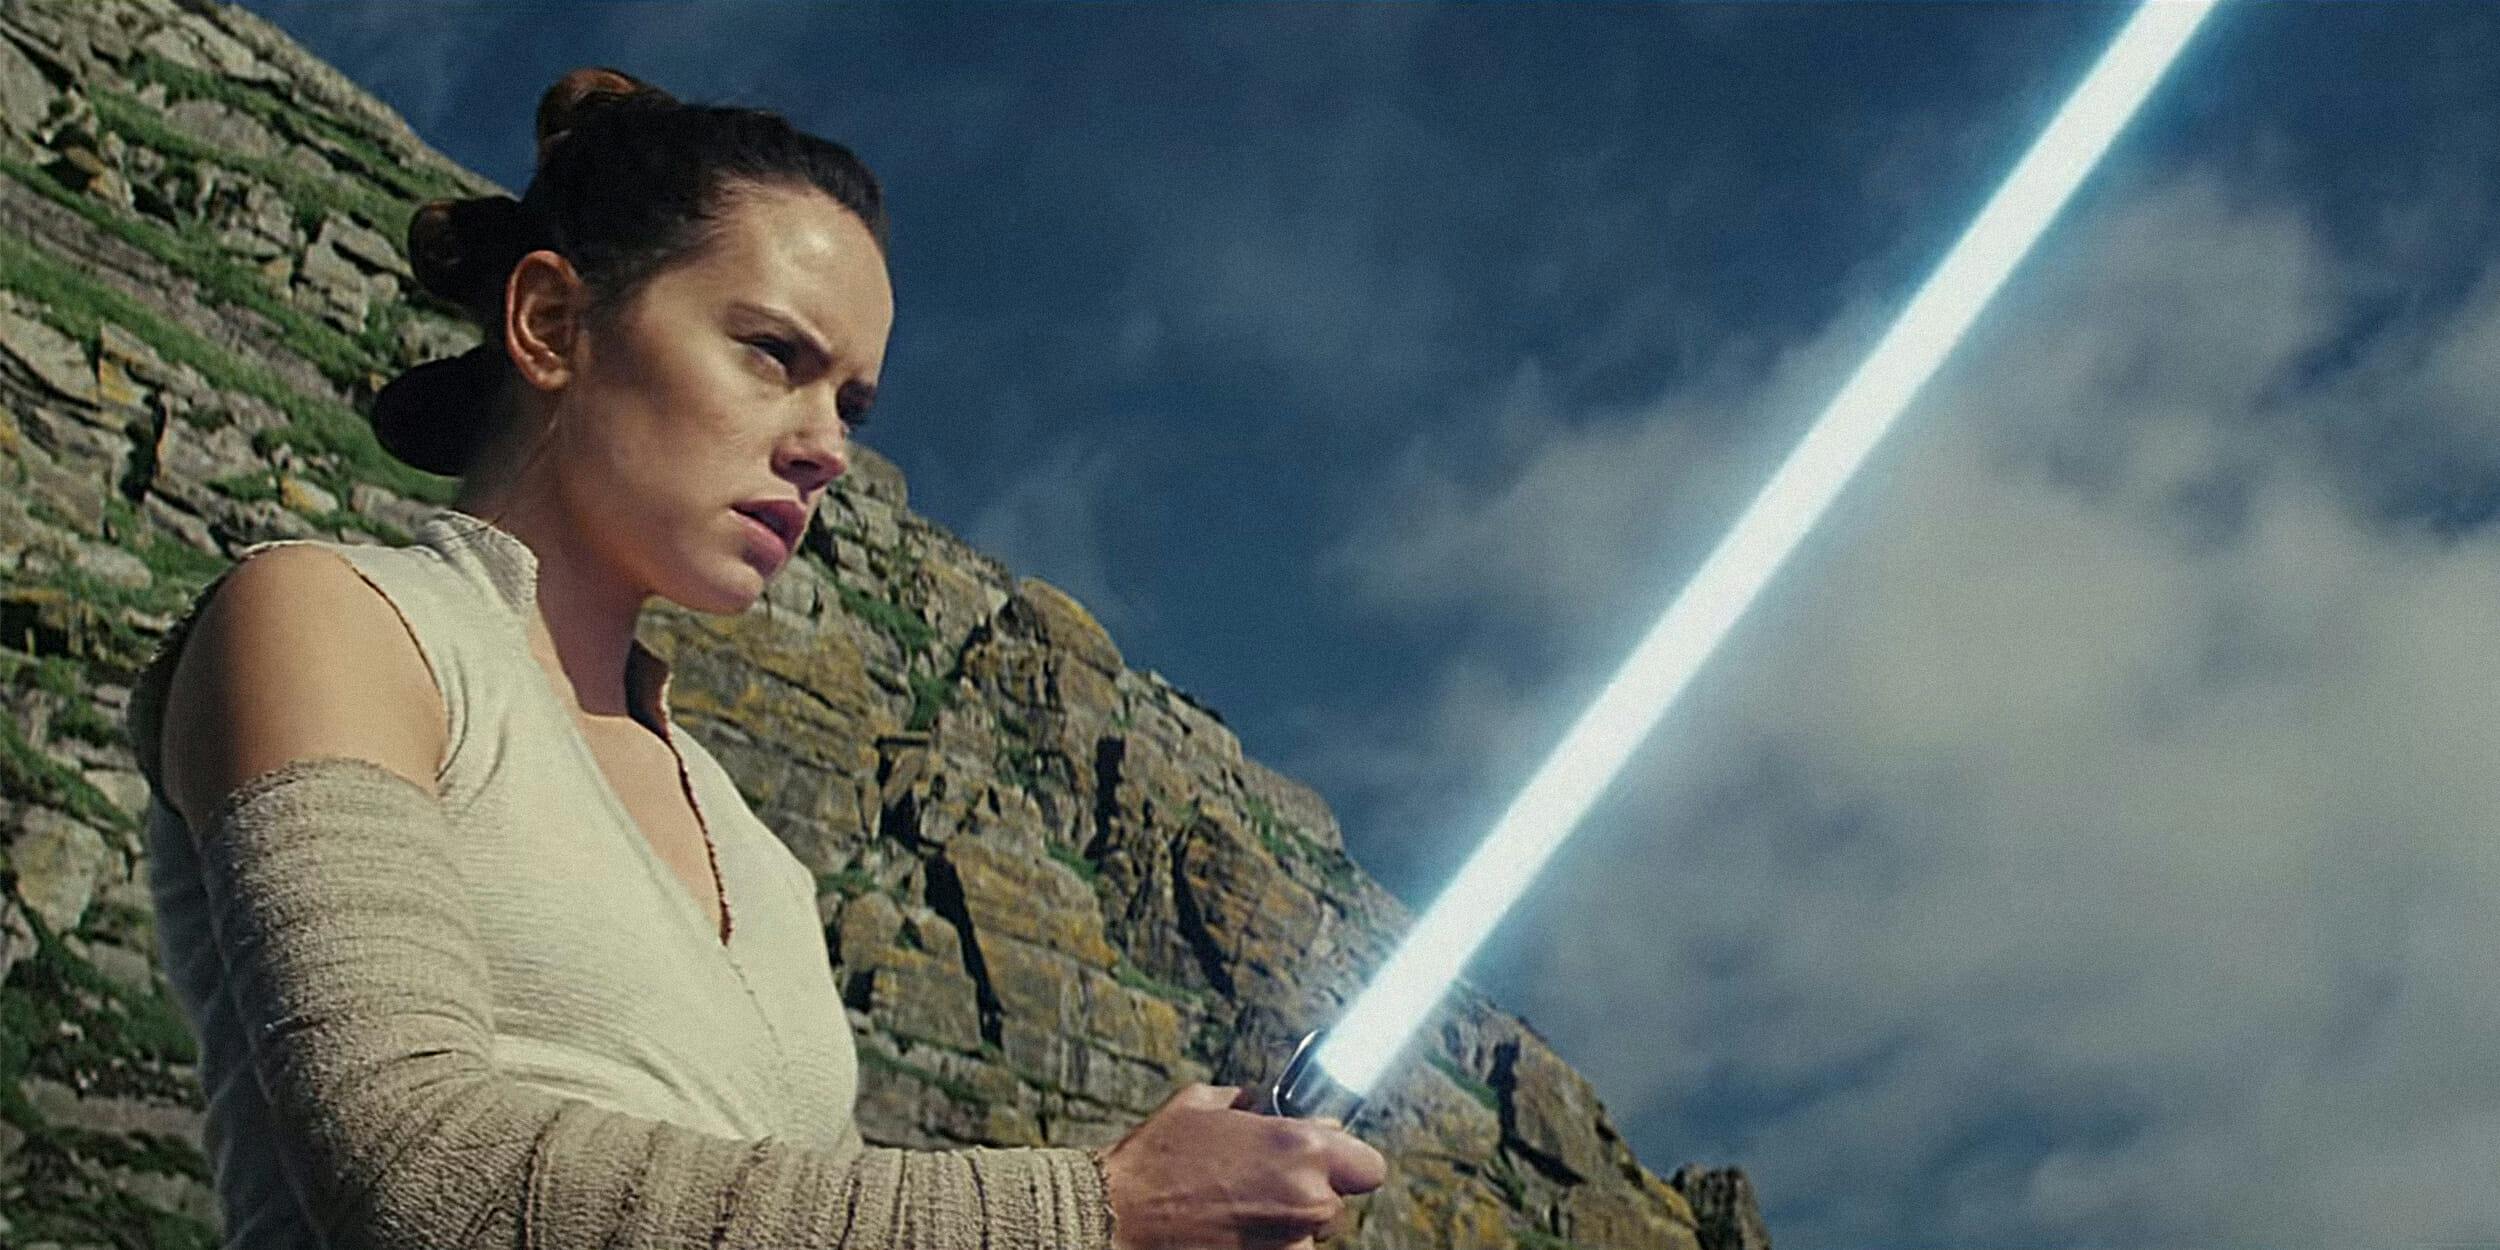 Rey from Star Wars swinging a lightsaber